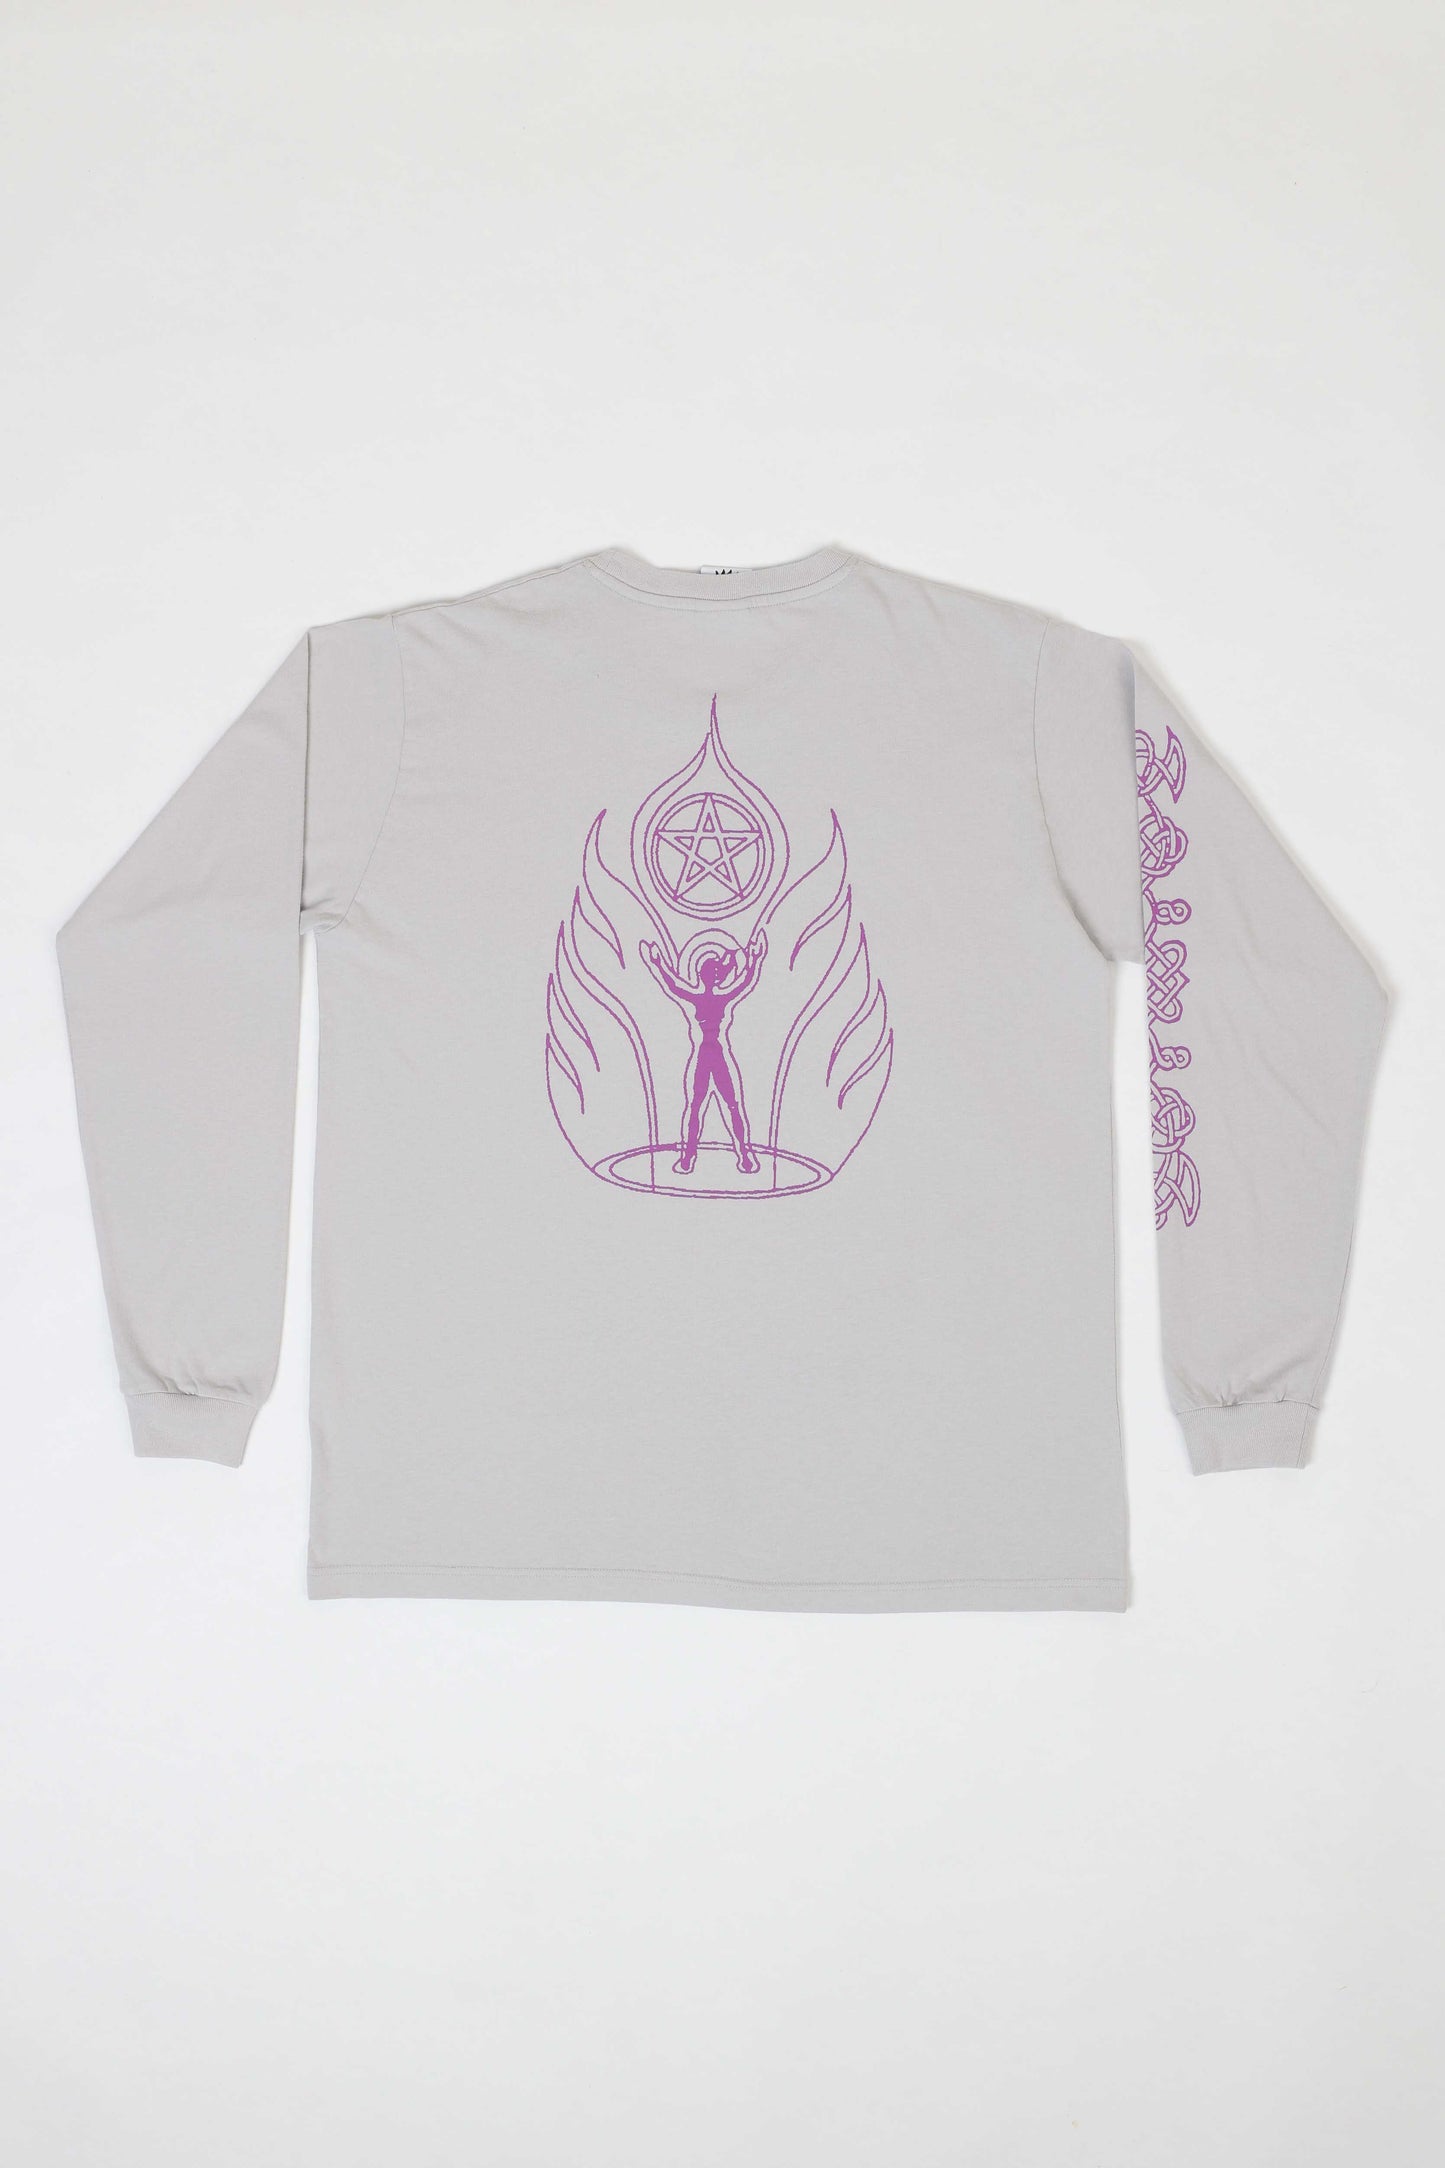 Legalize Witchcraft LS Tee – Stone